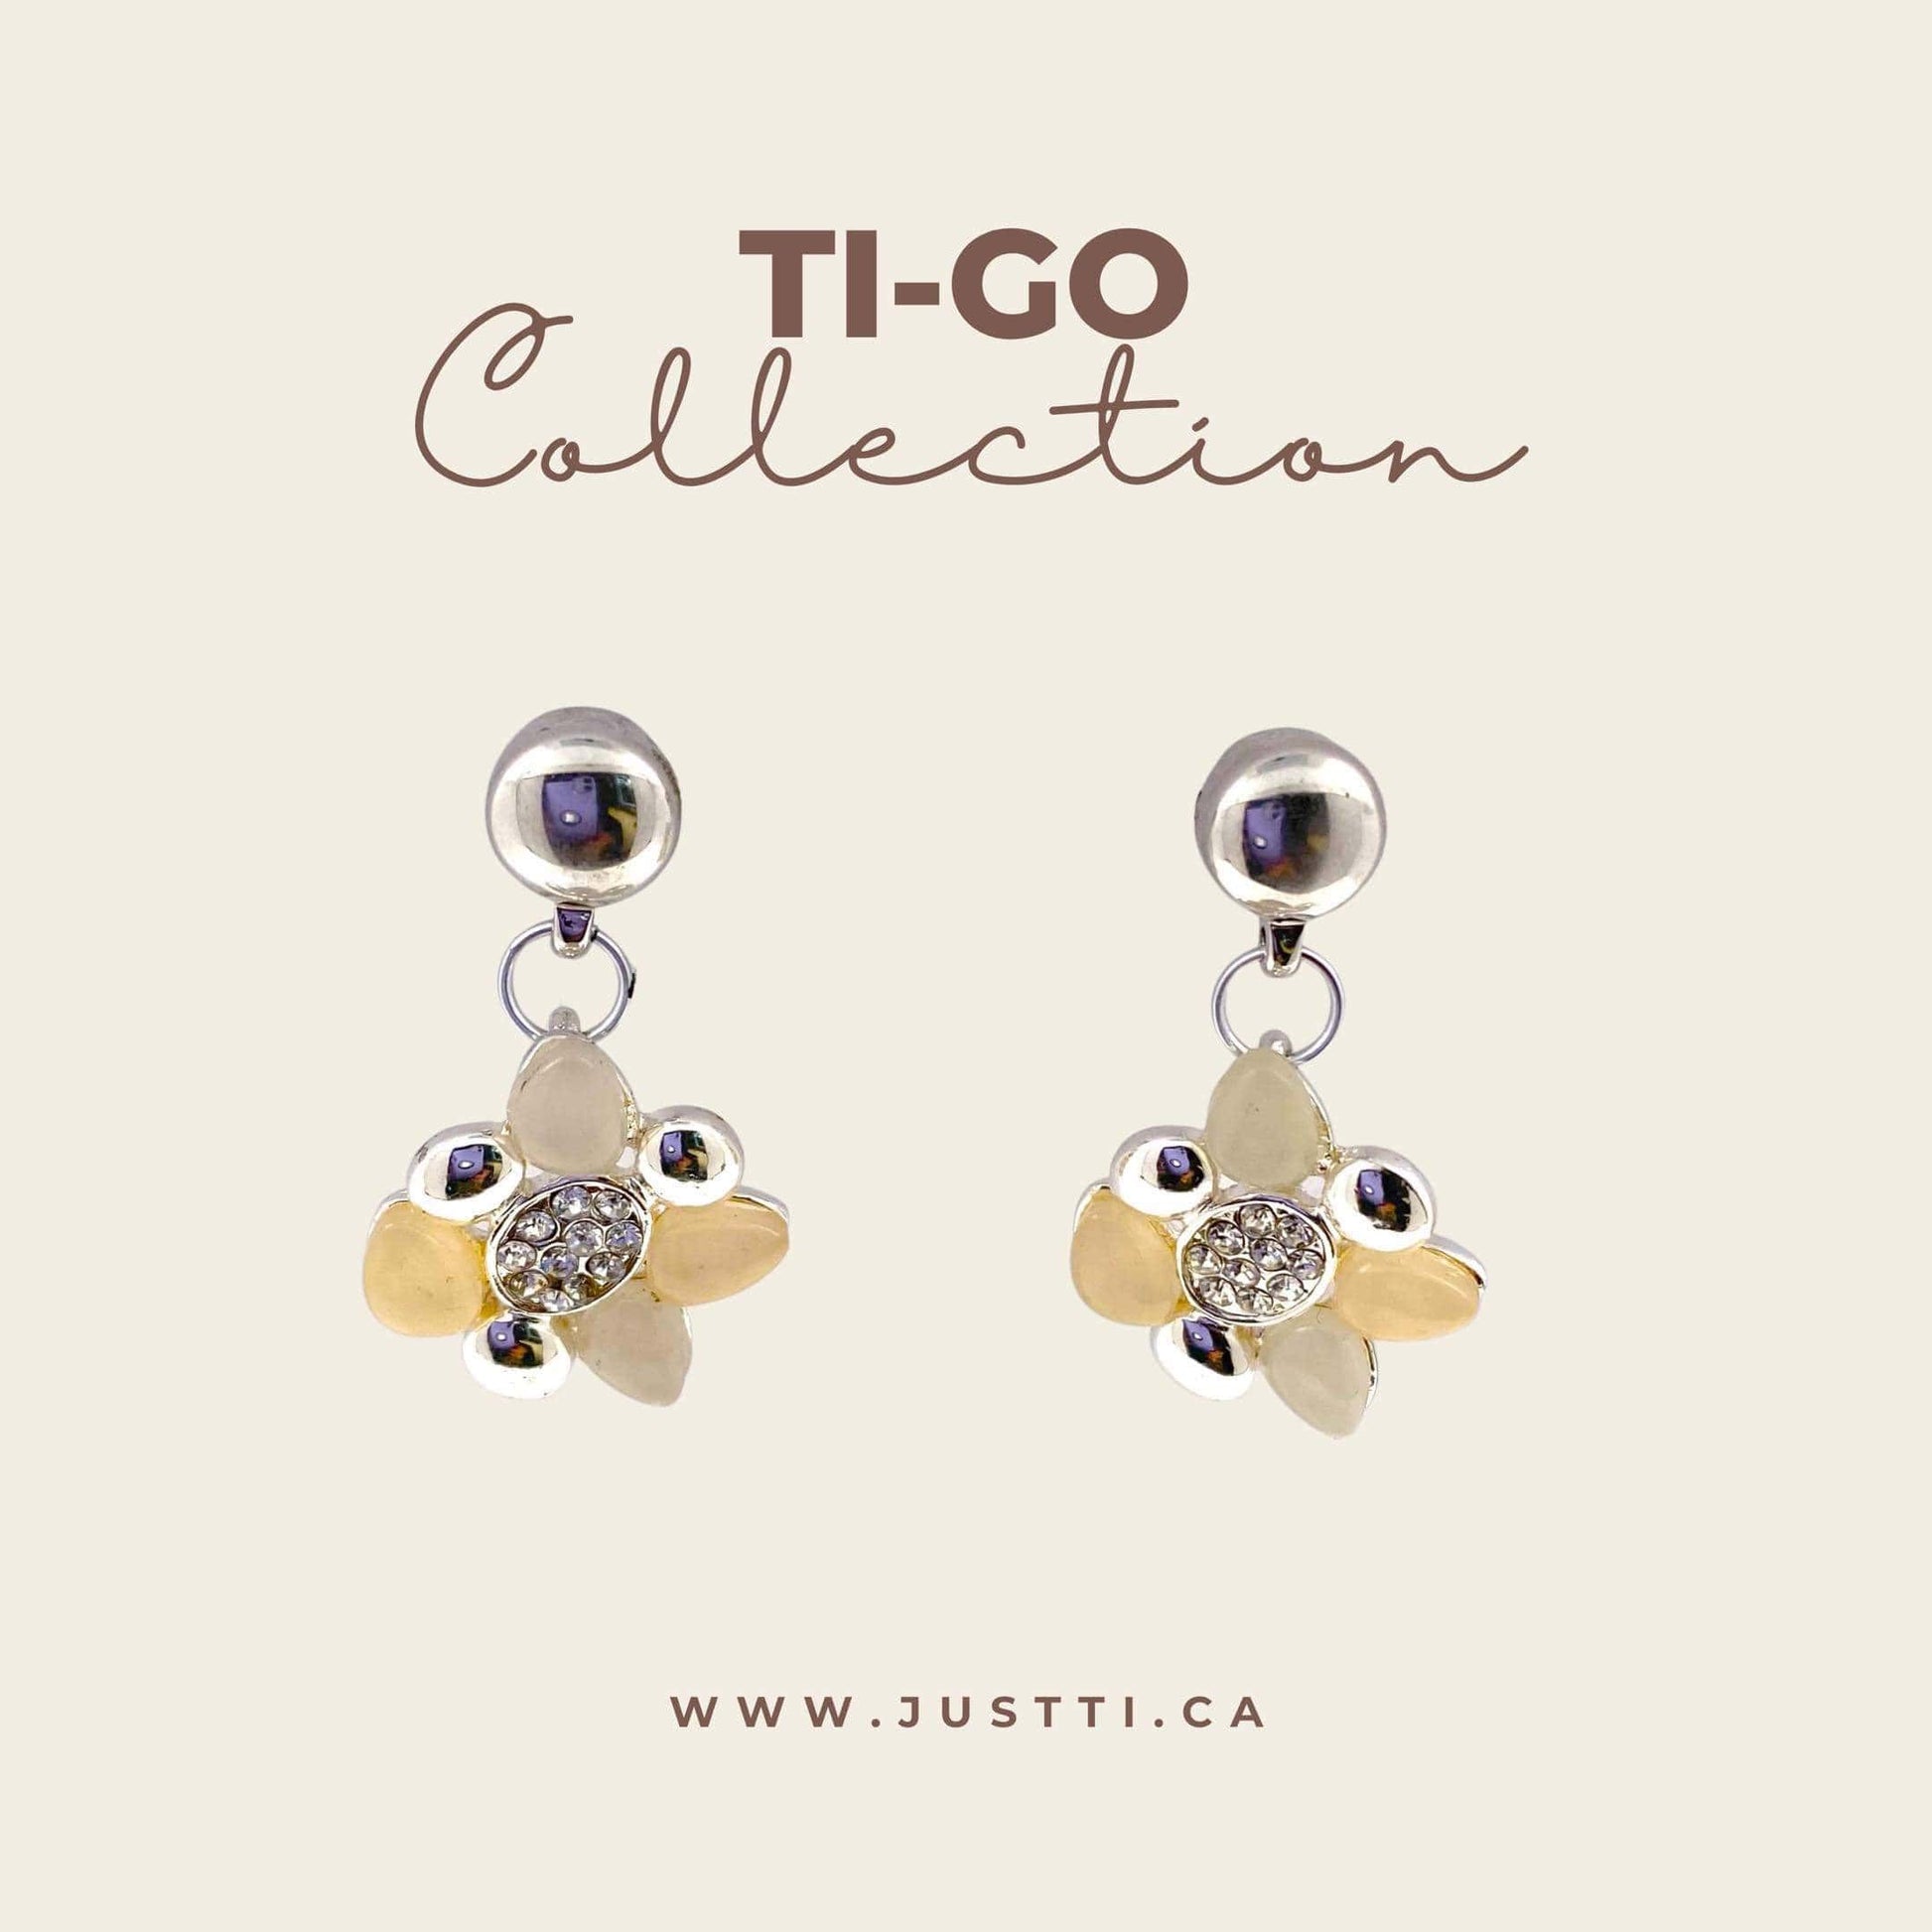 TI-GO Summer Blossom leaf earring. Detachable earrings for a truly hypoallergenic jewellery on a white background